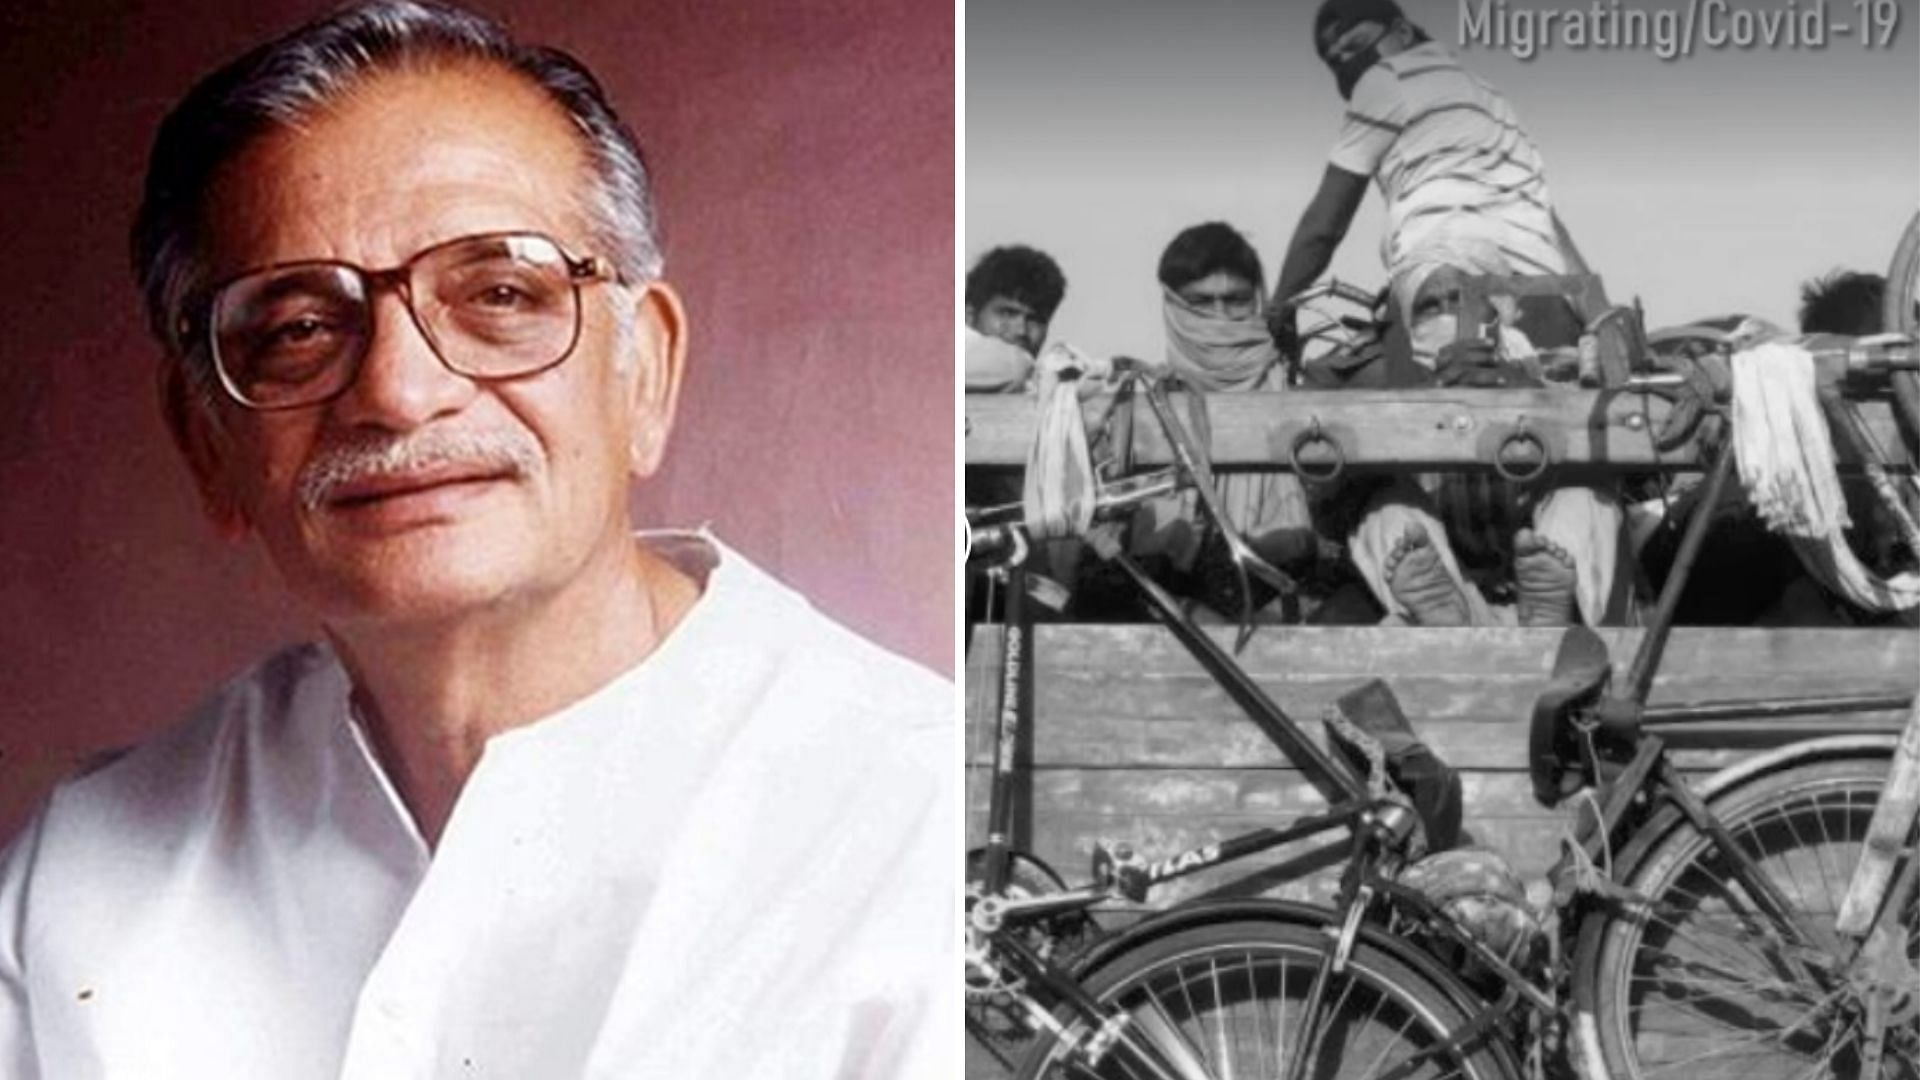 Gulzar pens a poem on the plight of migrant workers in the country.&nbsp;